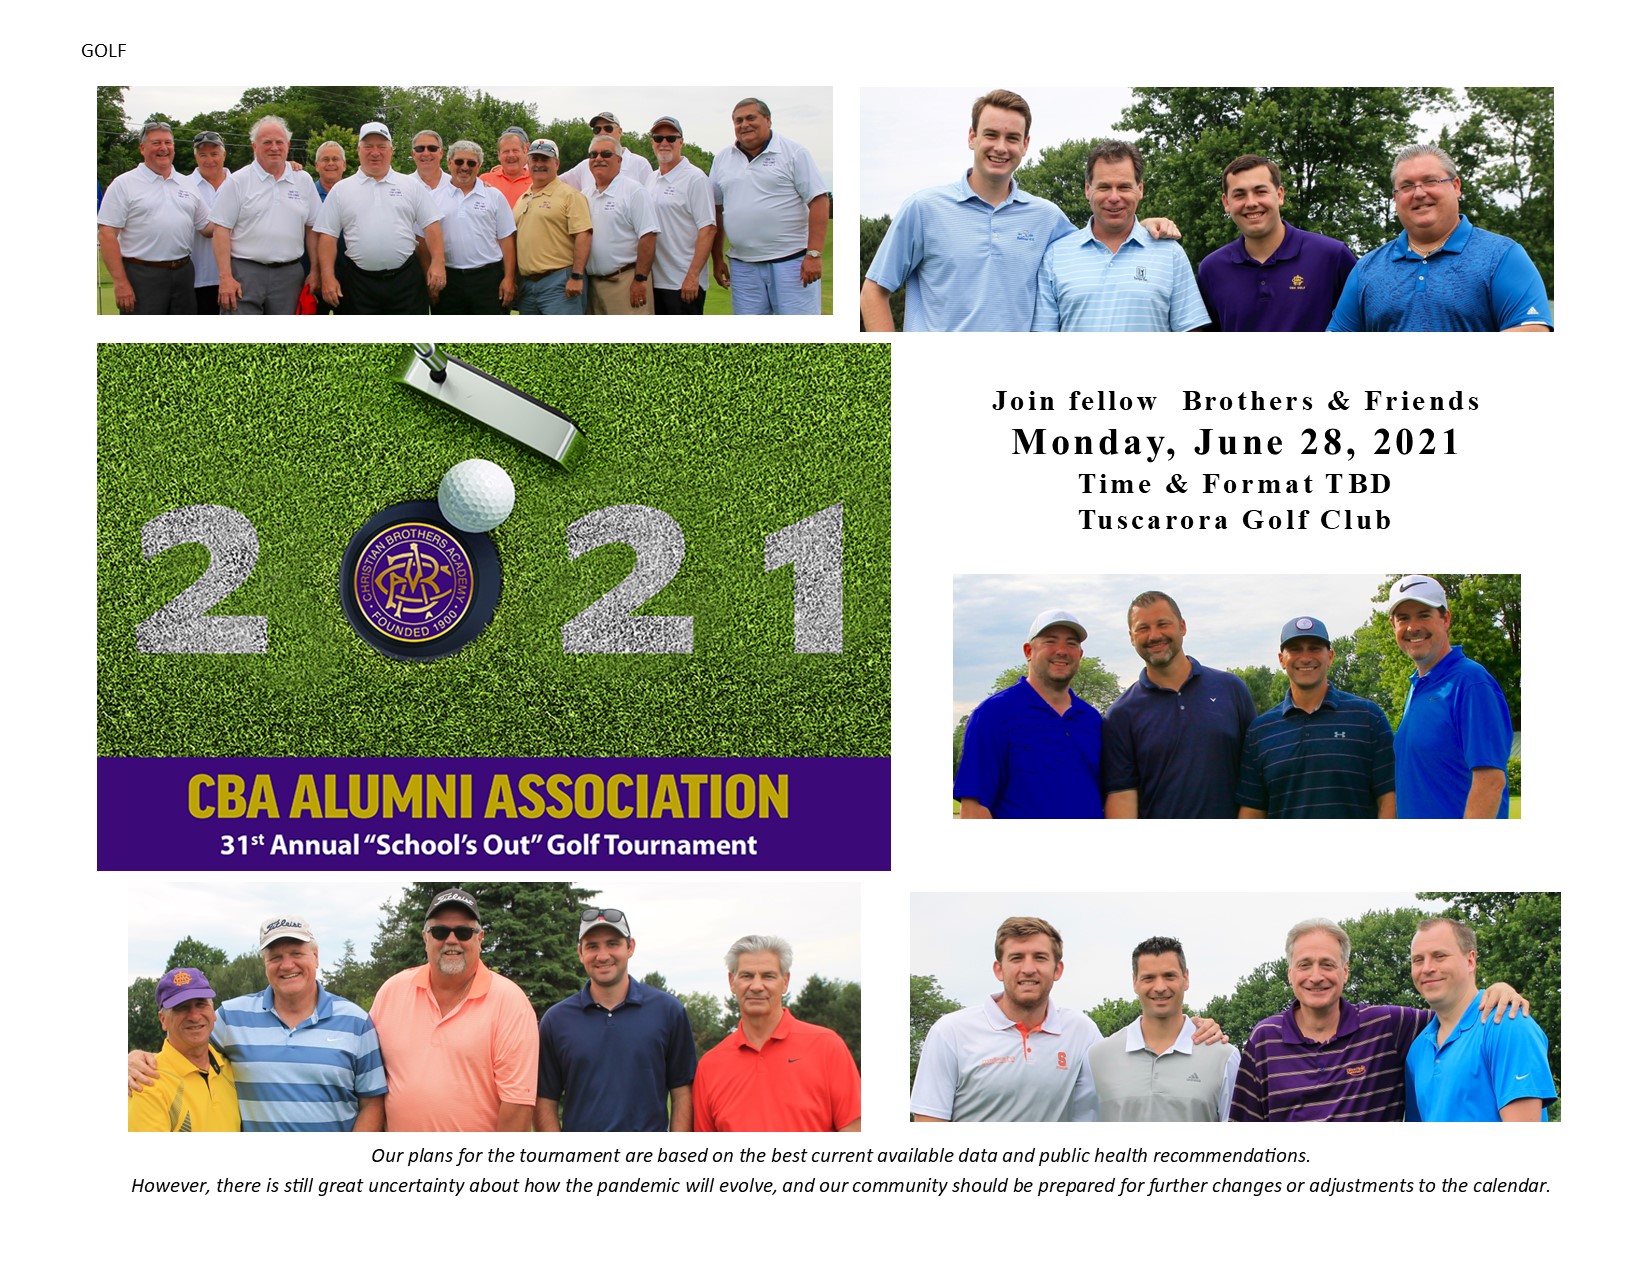 31st Annual "School's Out" Golf Tournament June 28